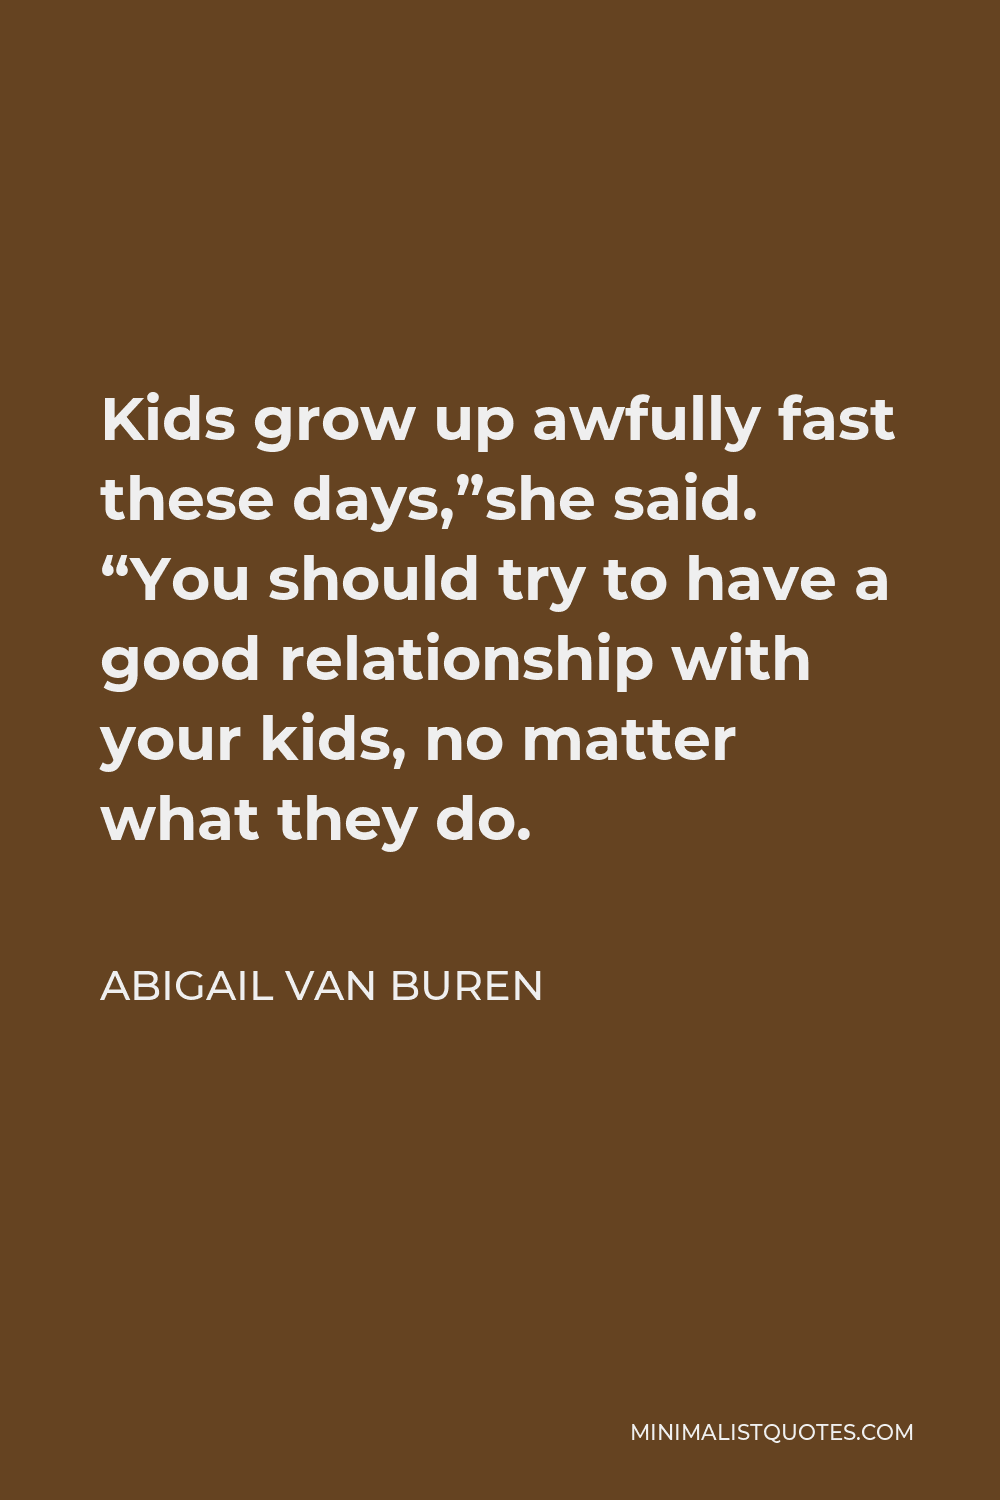 Abigail Van Buren Quote - Kids grow up awfully fast these days,”she said. “You should try to have a good relationship with your kids, no matter what they do.